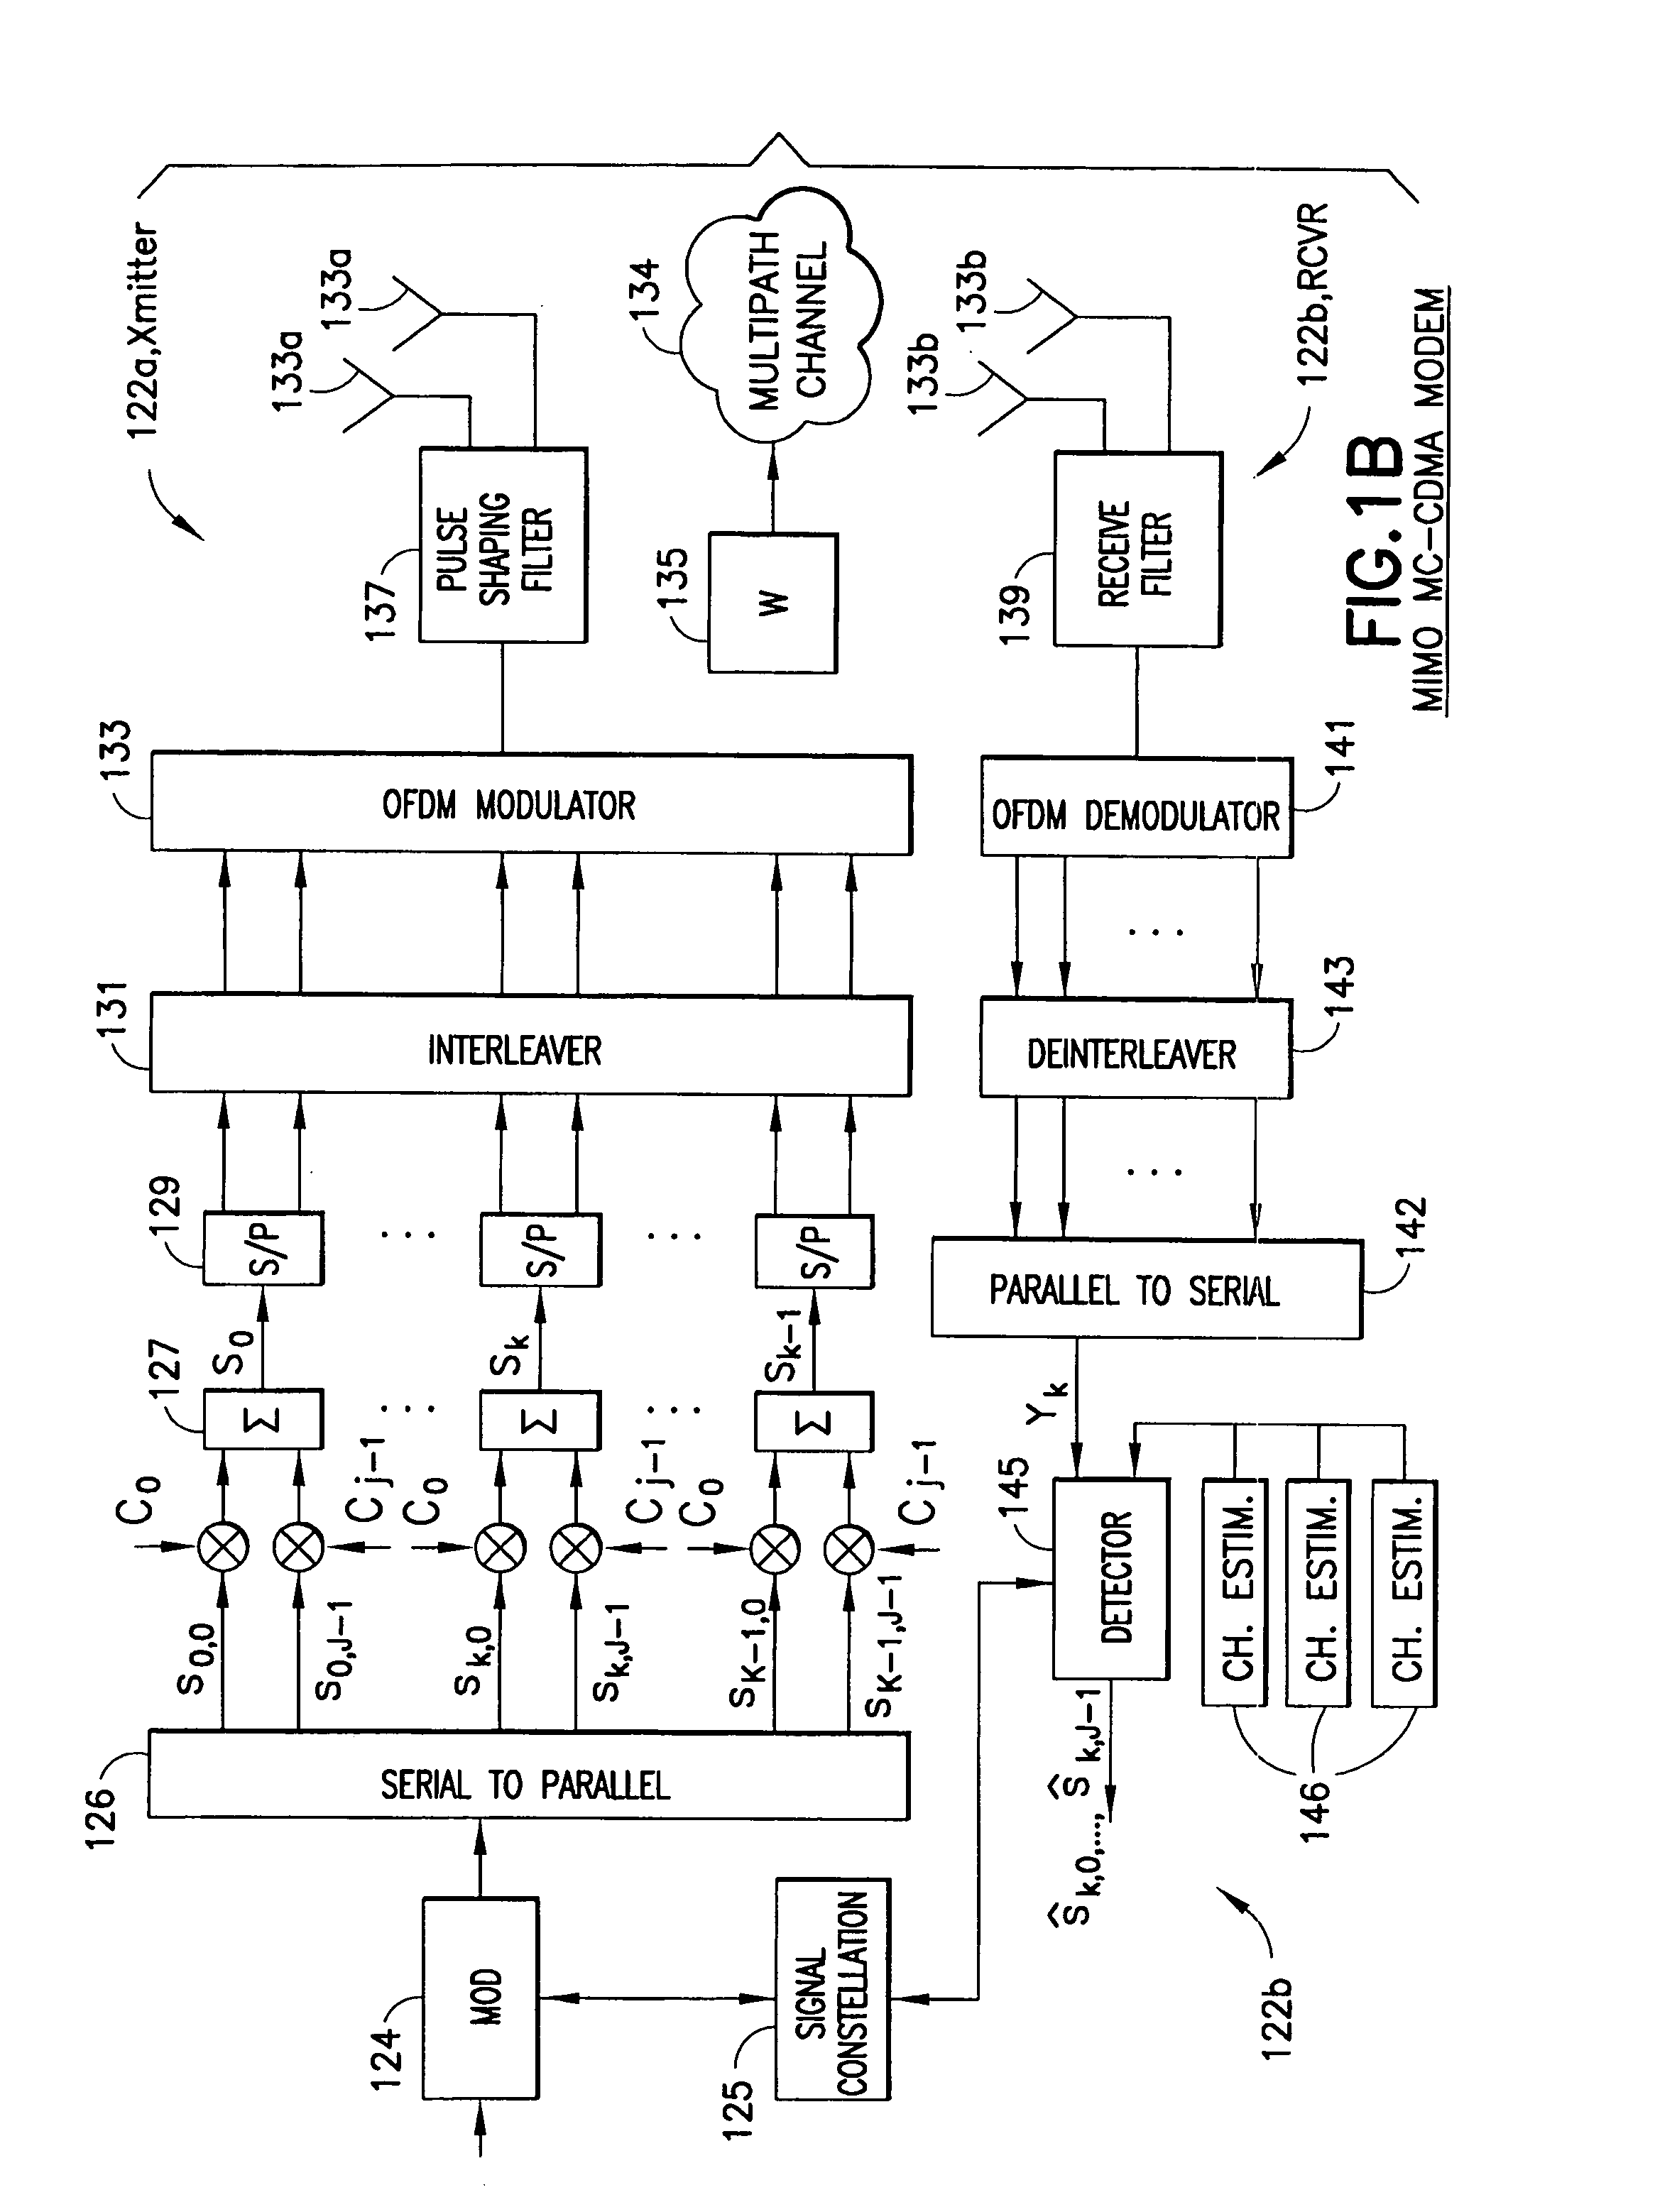 Multiple-antenna partially coherent constellations for multi-carrier systems